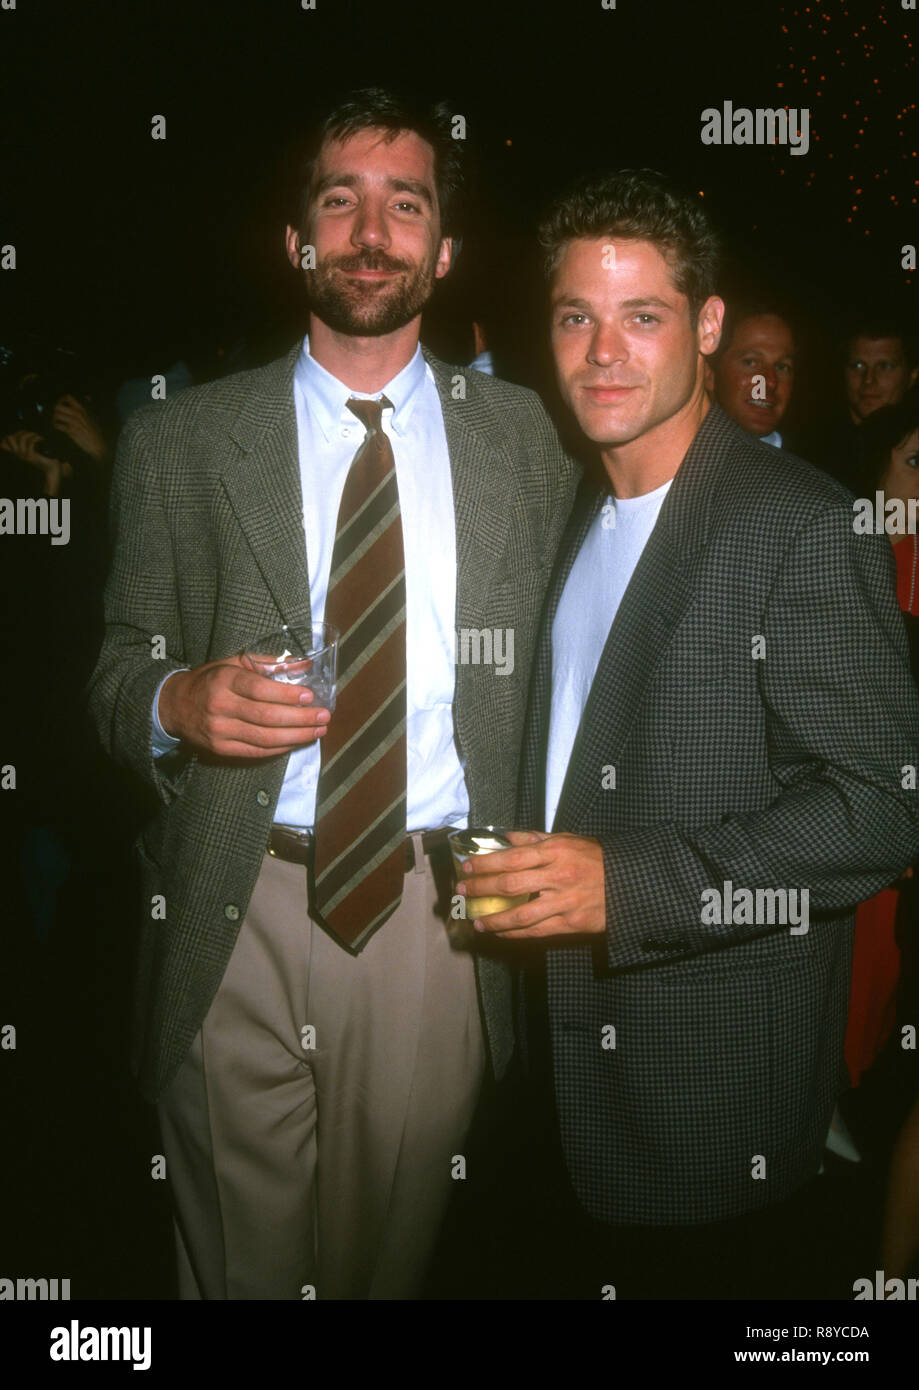 WEST HOLLYWOOD, CA - APRIL 29: Agent Brian Swardstrom andactor David Barry Gray attend the 'Three of Hearts' West Hollywood Premiere on April 29, 1993 at the DGA Theater in West Hollywood, California. Photo by Barry King/Alamy Stock Photo Stock Photo